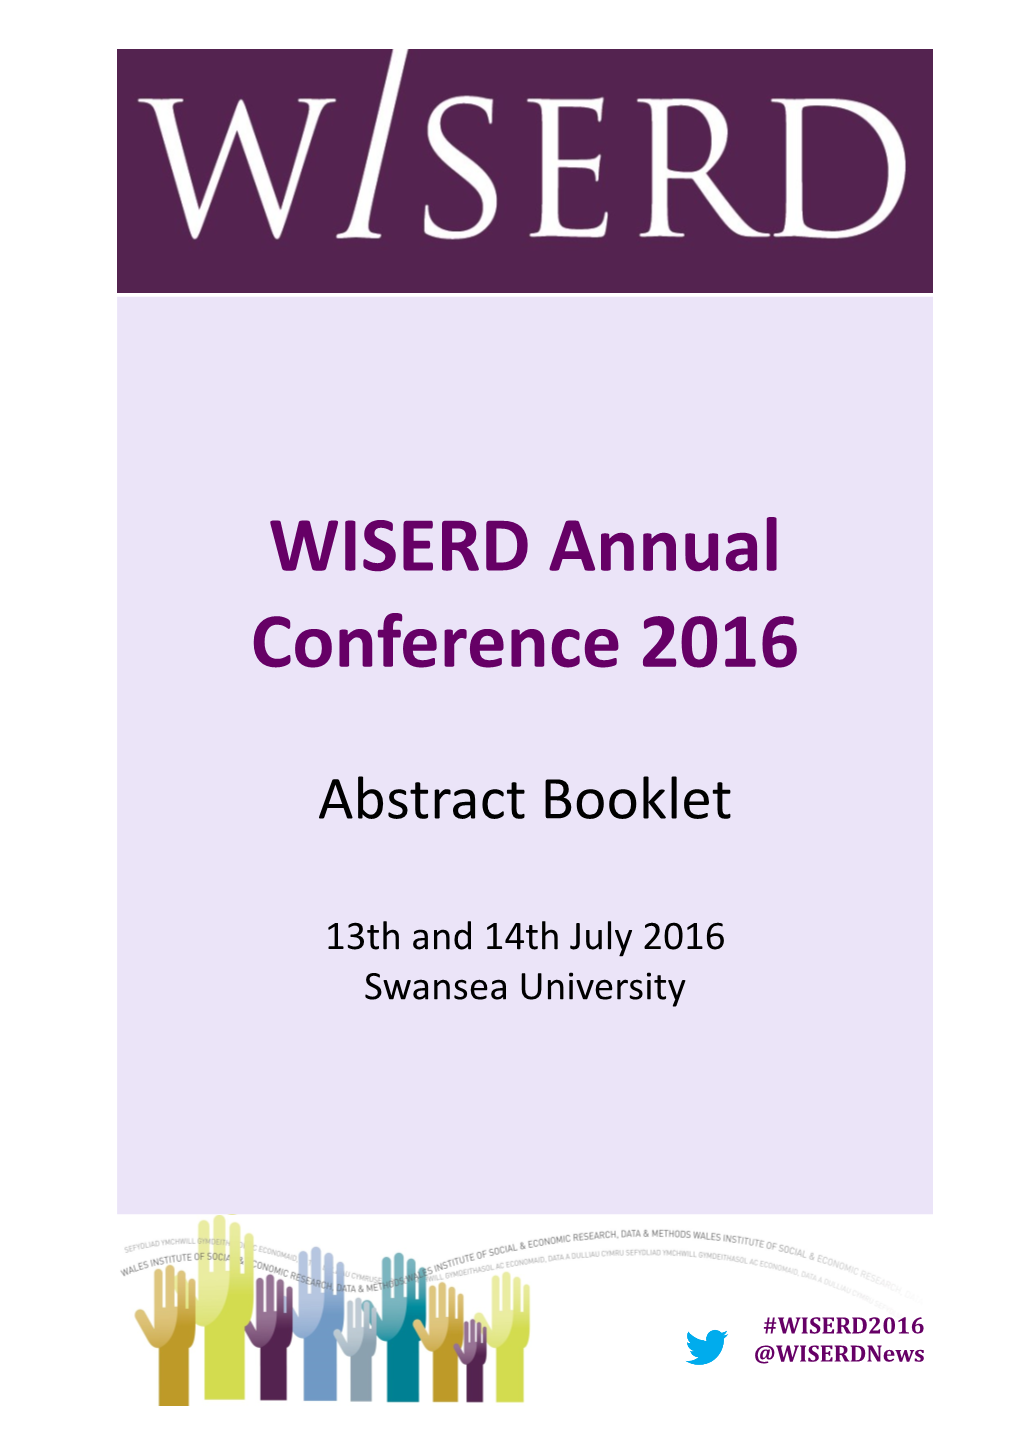 WISERD Annual Conference 2016